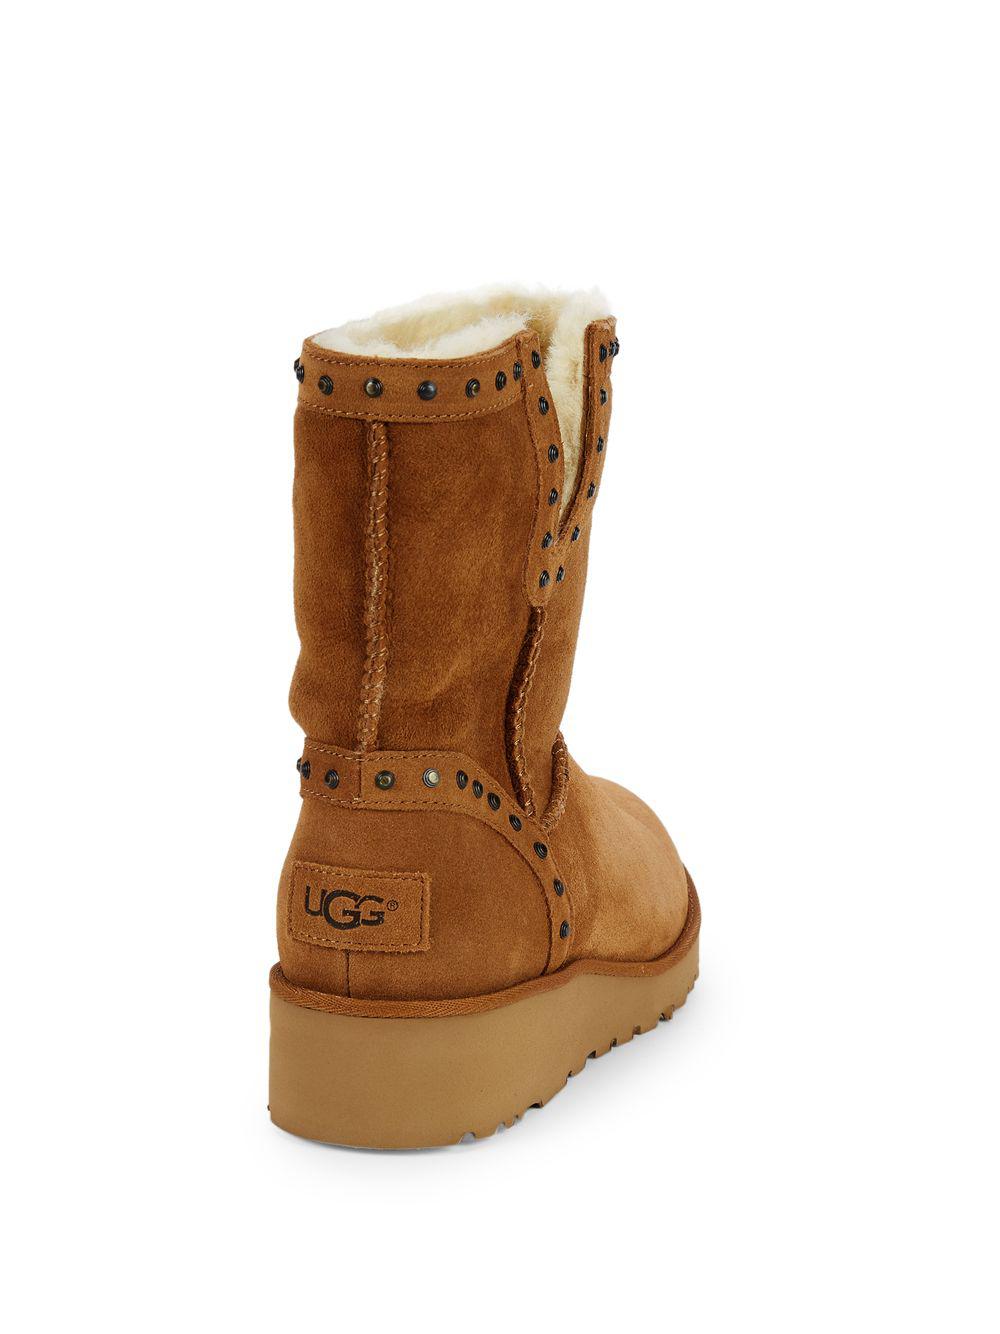 UGG Cyd Lamb Shearling Studded Boots in Brown | Lyst